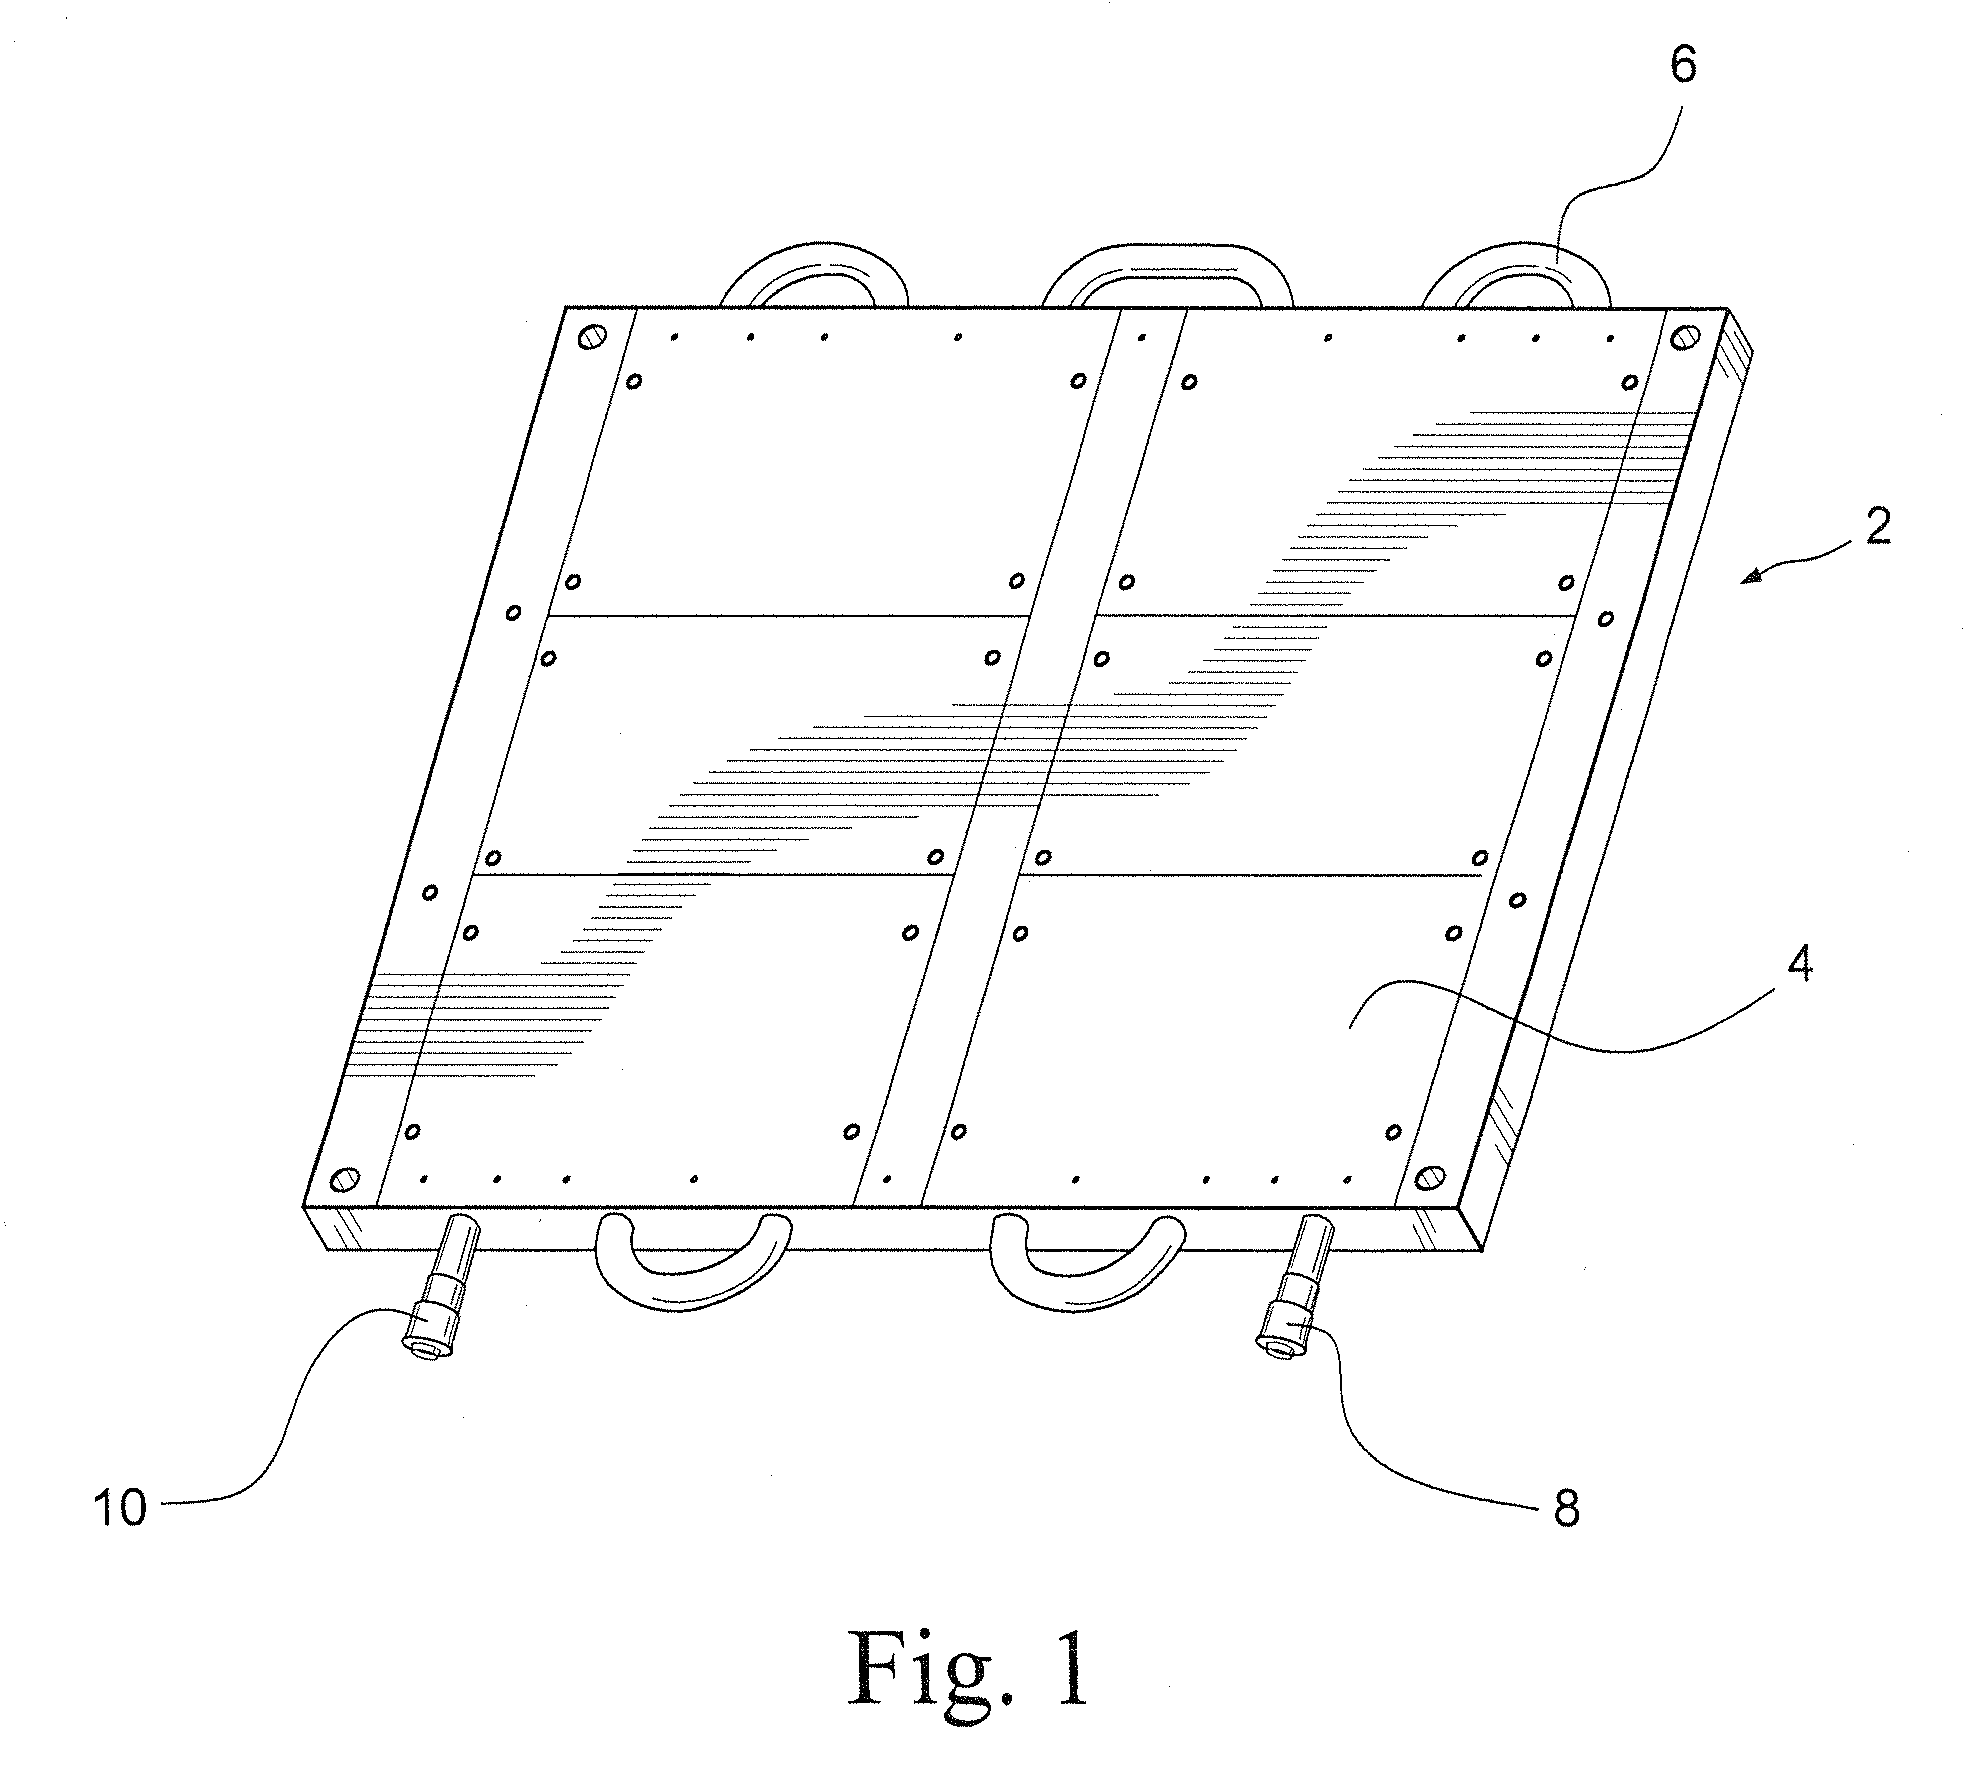 Liquid-cooled grounded heatsink for diode rectifier system